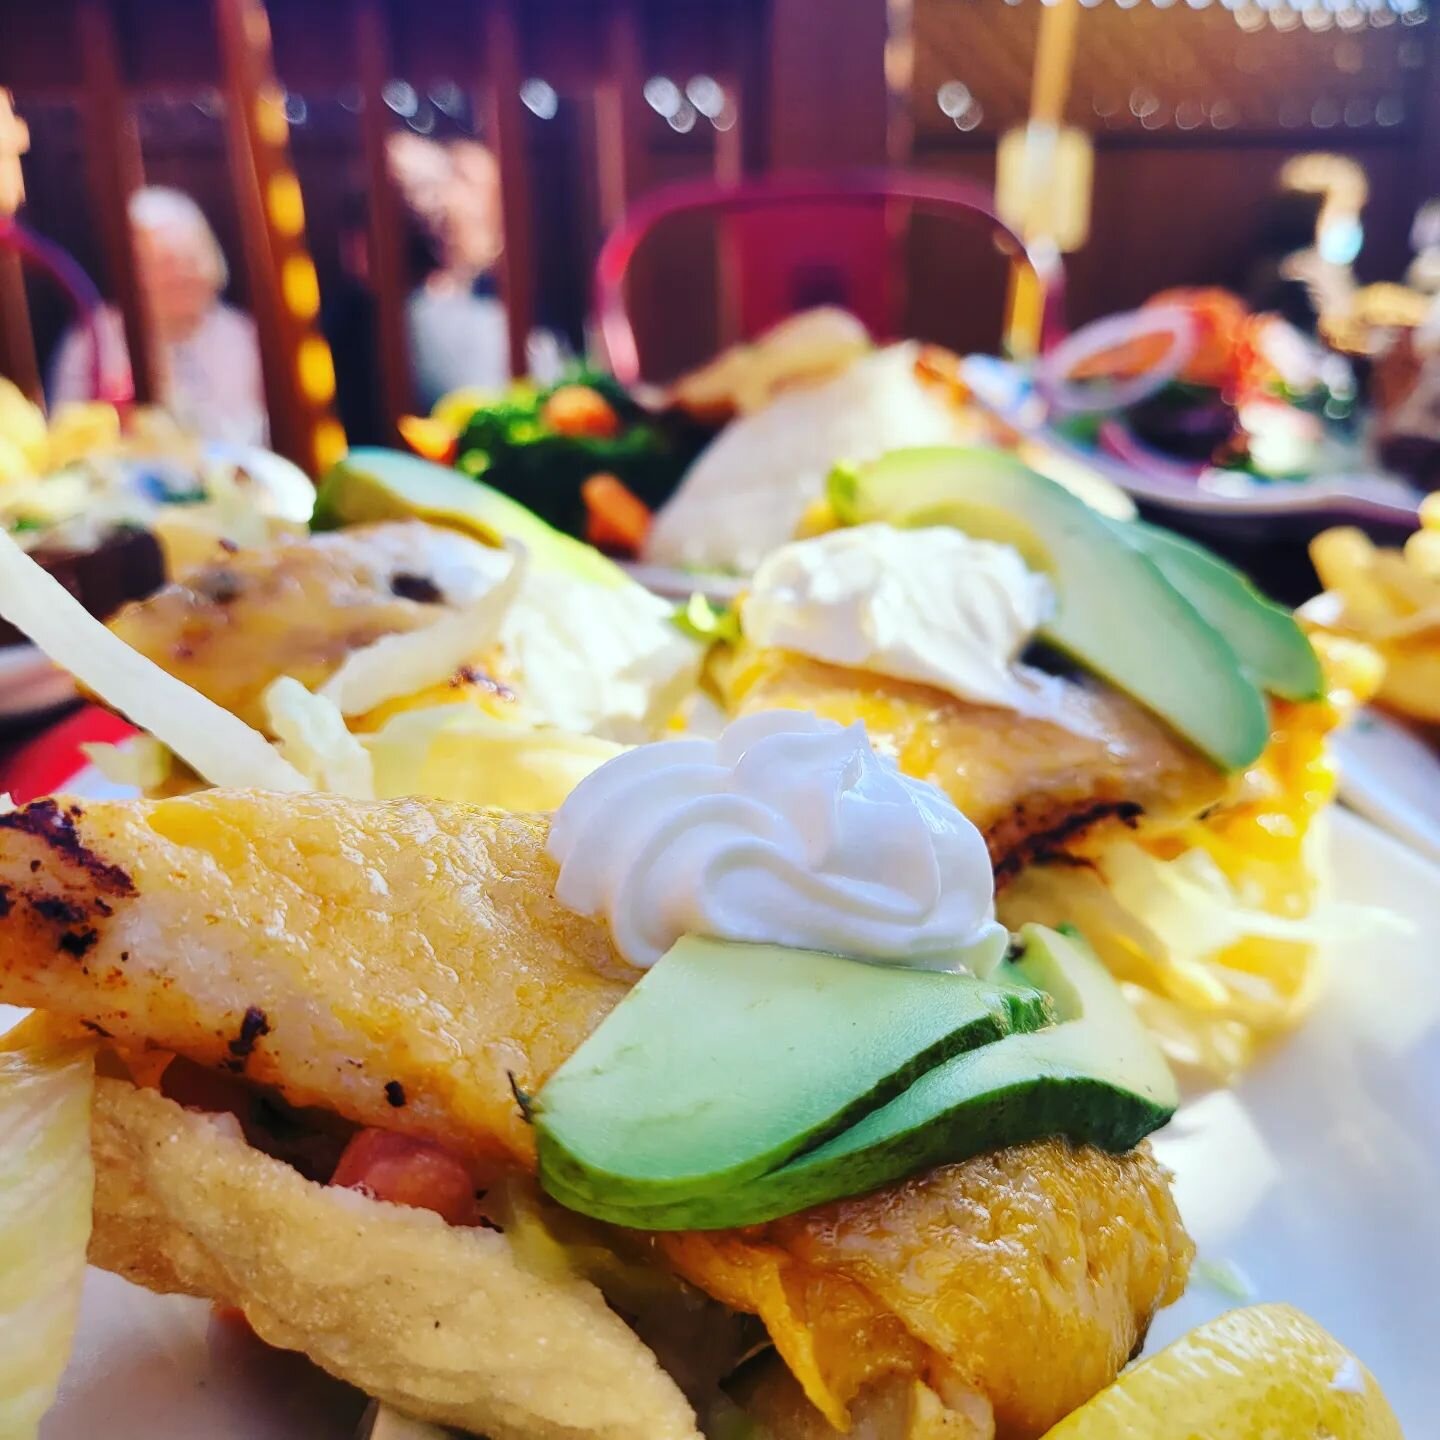 A little fish walks into 7 Mile. Our bartender @cashoutlynn asks the fish &ldquo;What can I get you?&rdquo;
The little fish replies (gasping) &ldquo;Water! I need water!&rdquo;
🤣💦🎣

This is my mom's @cleo.l.garcia all time favorite: our Fish Tacos